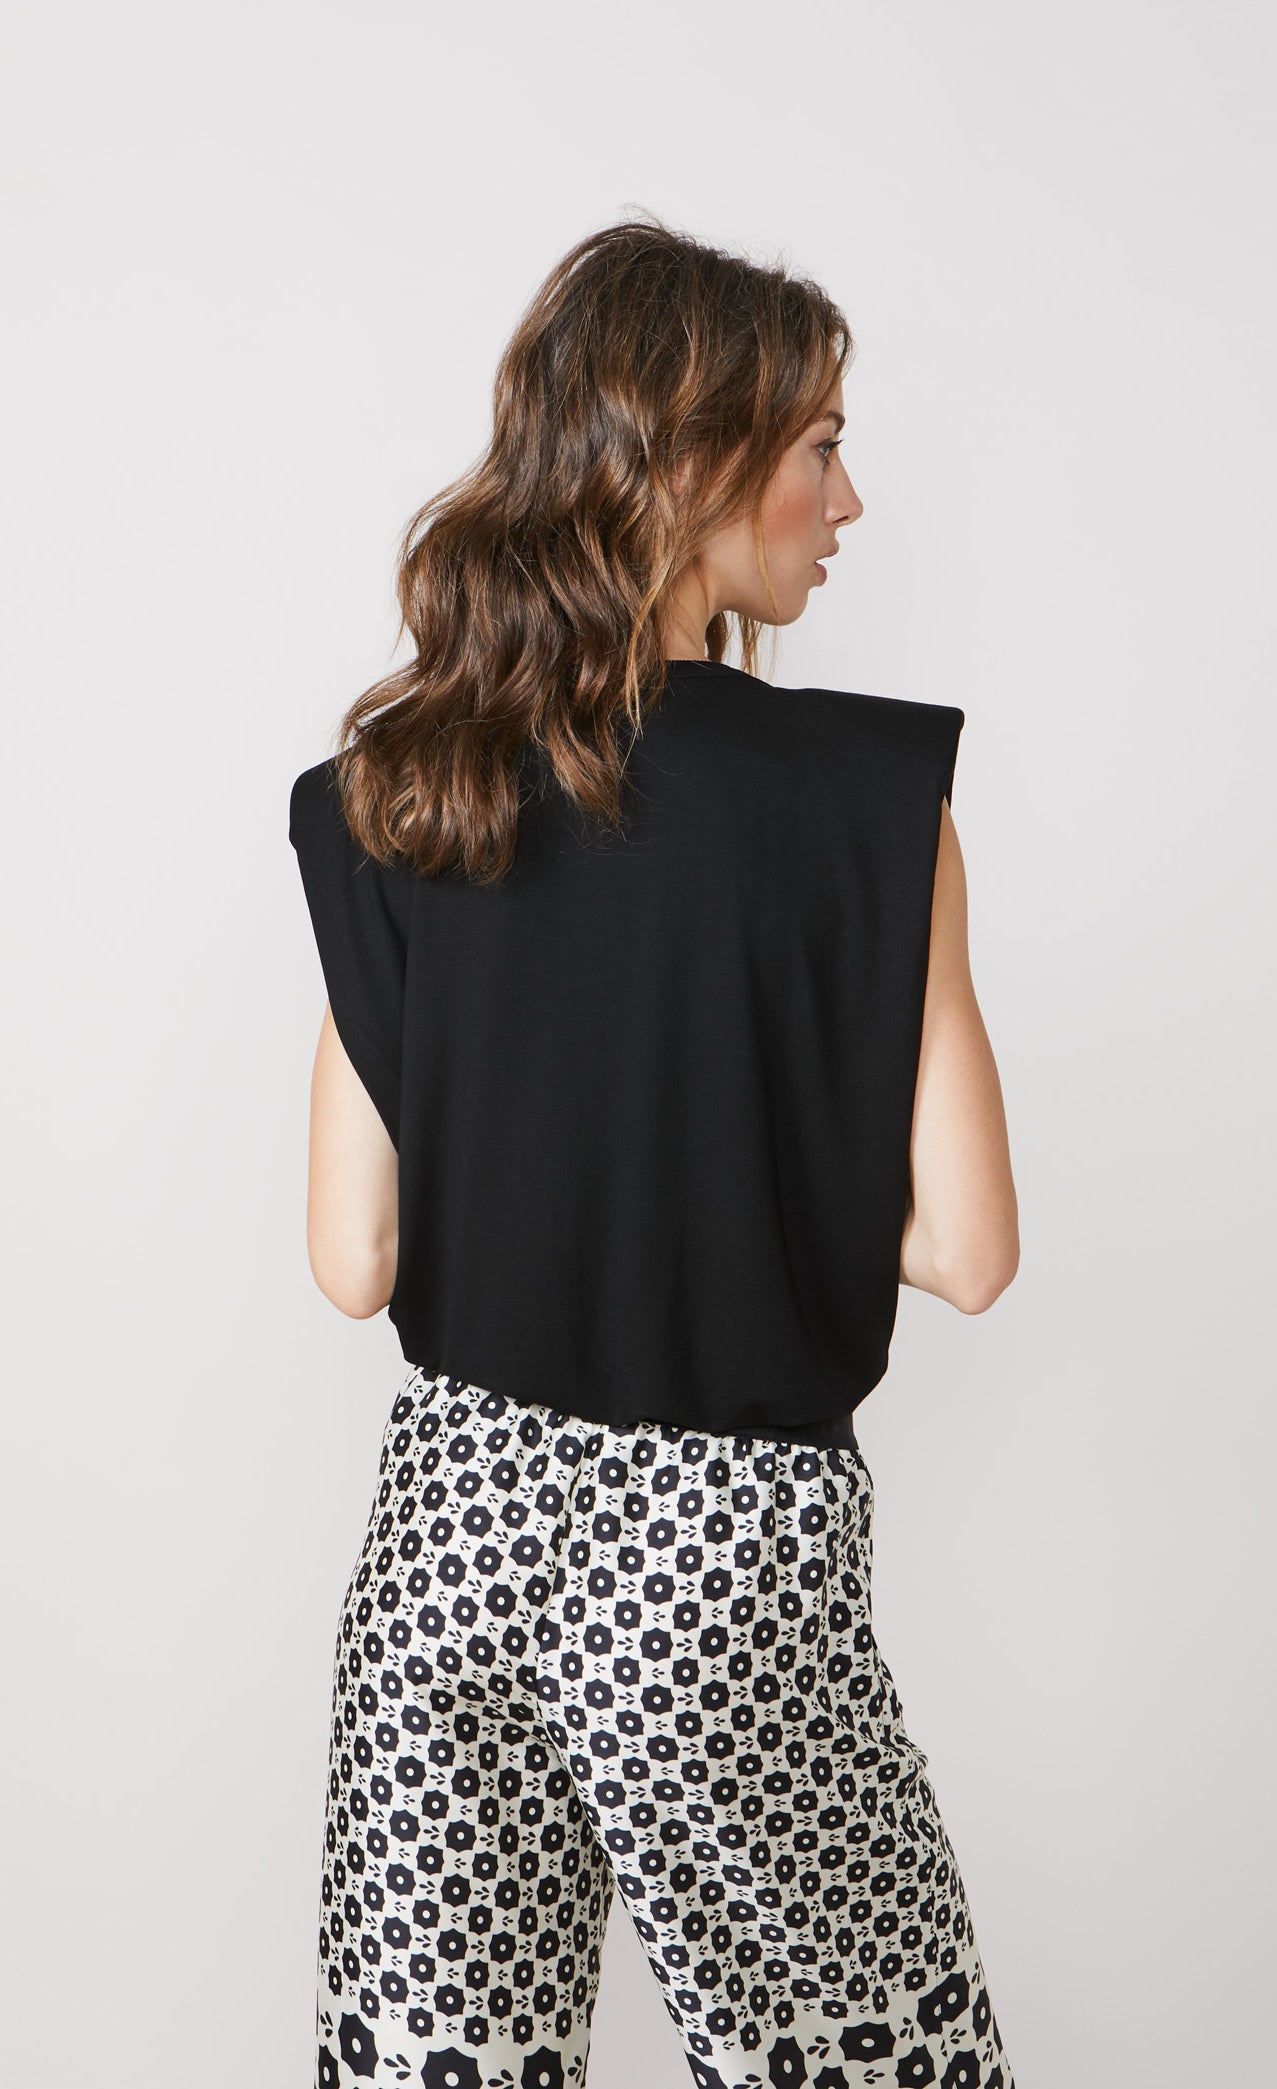 Back top half view of a woman wearing the summum shoulder pad top. This top is sleeves and black with a v-like shape. On the bottom the woman is wearing a white pant with black print.